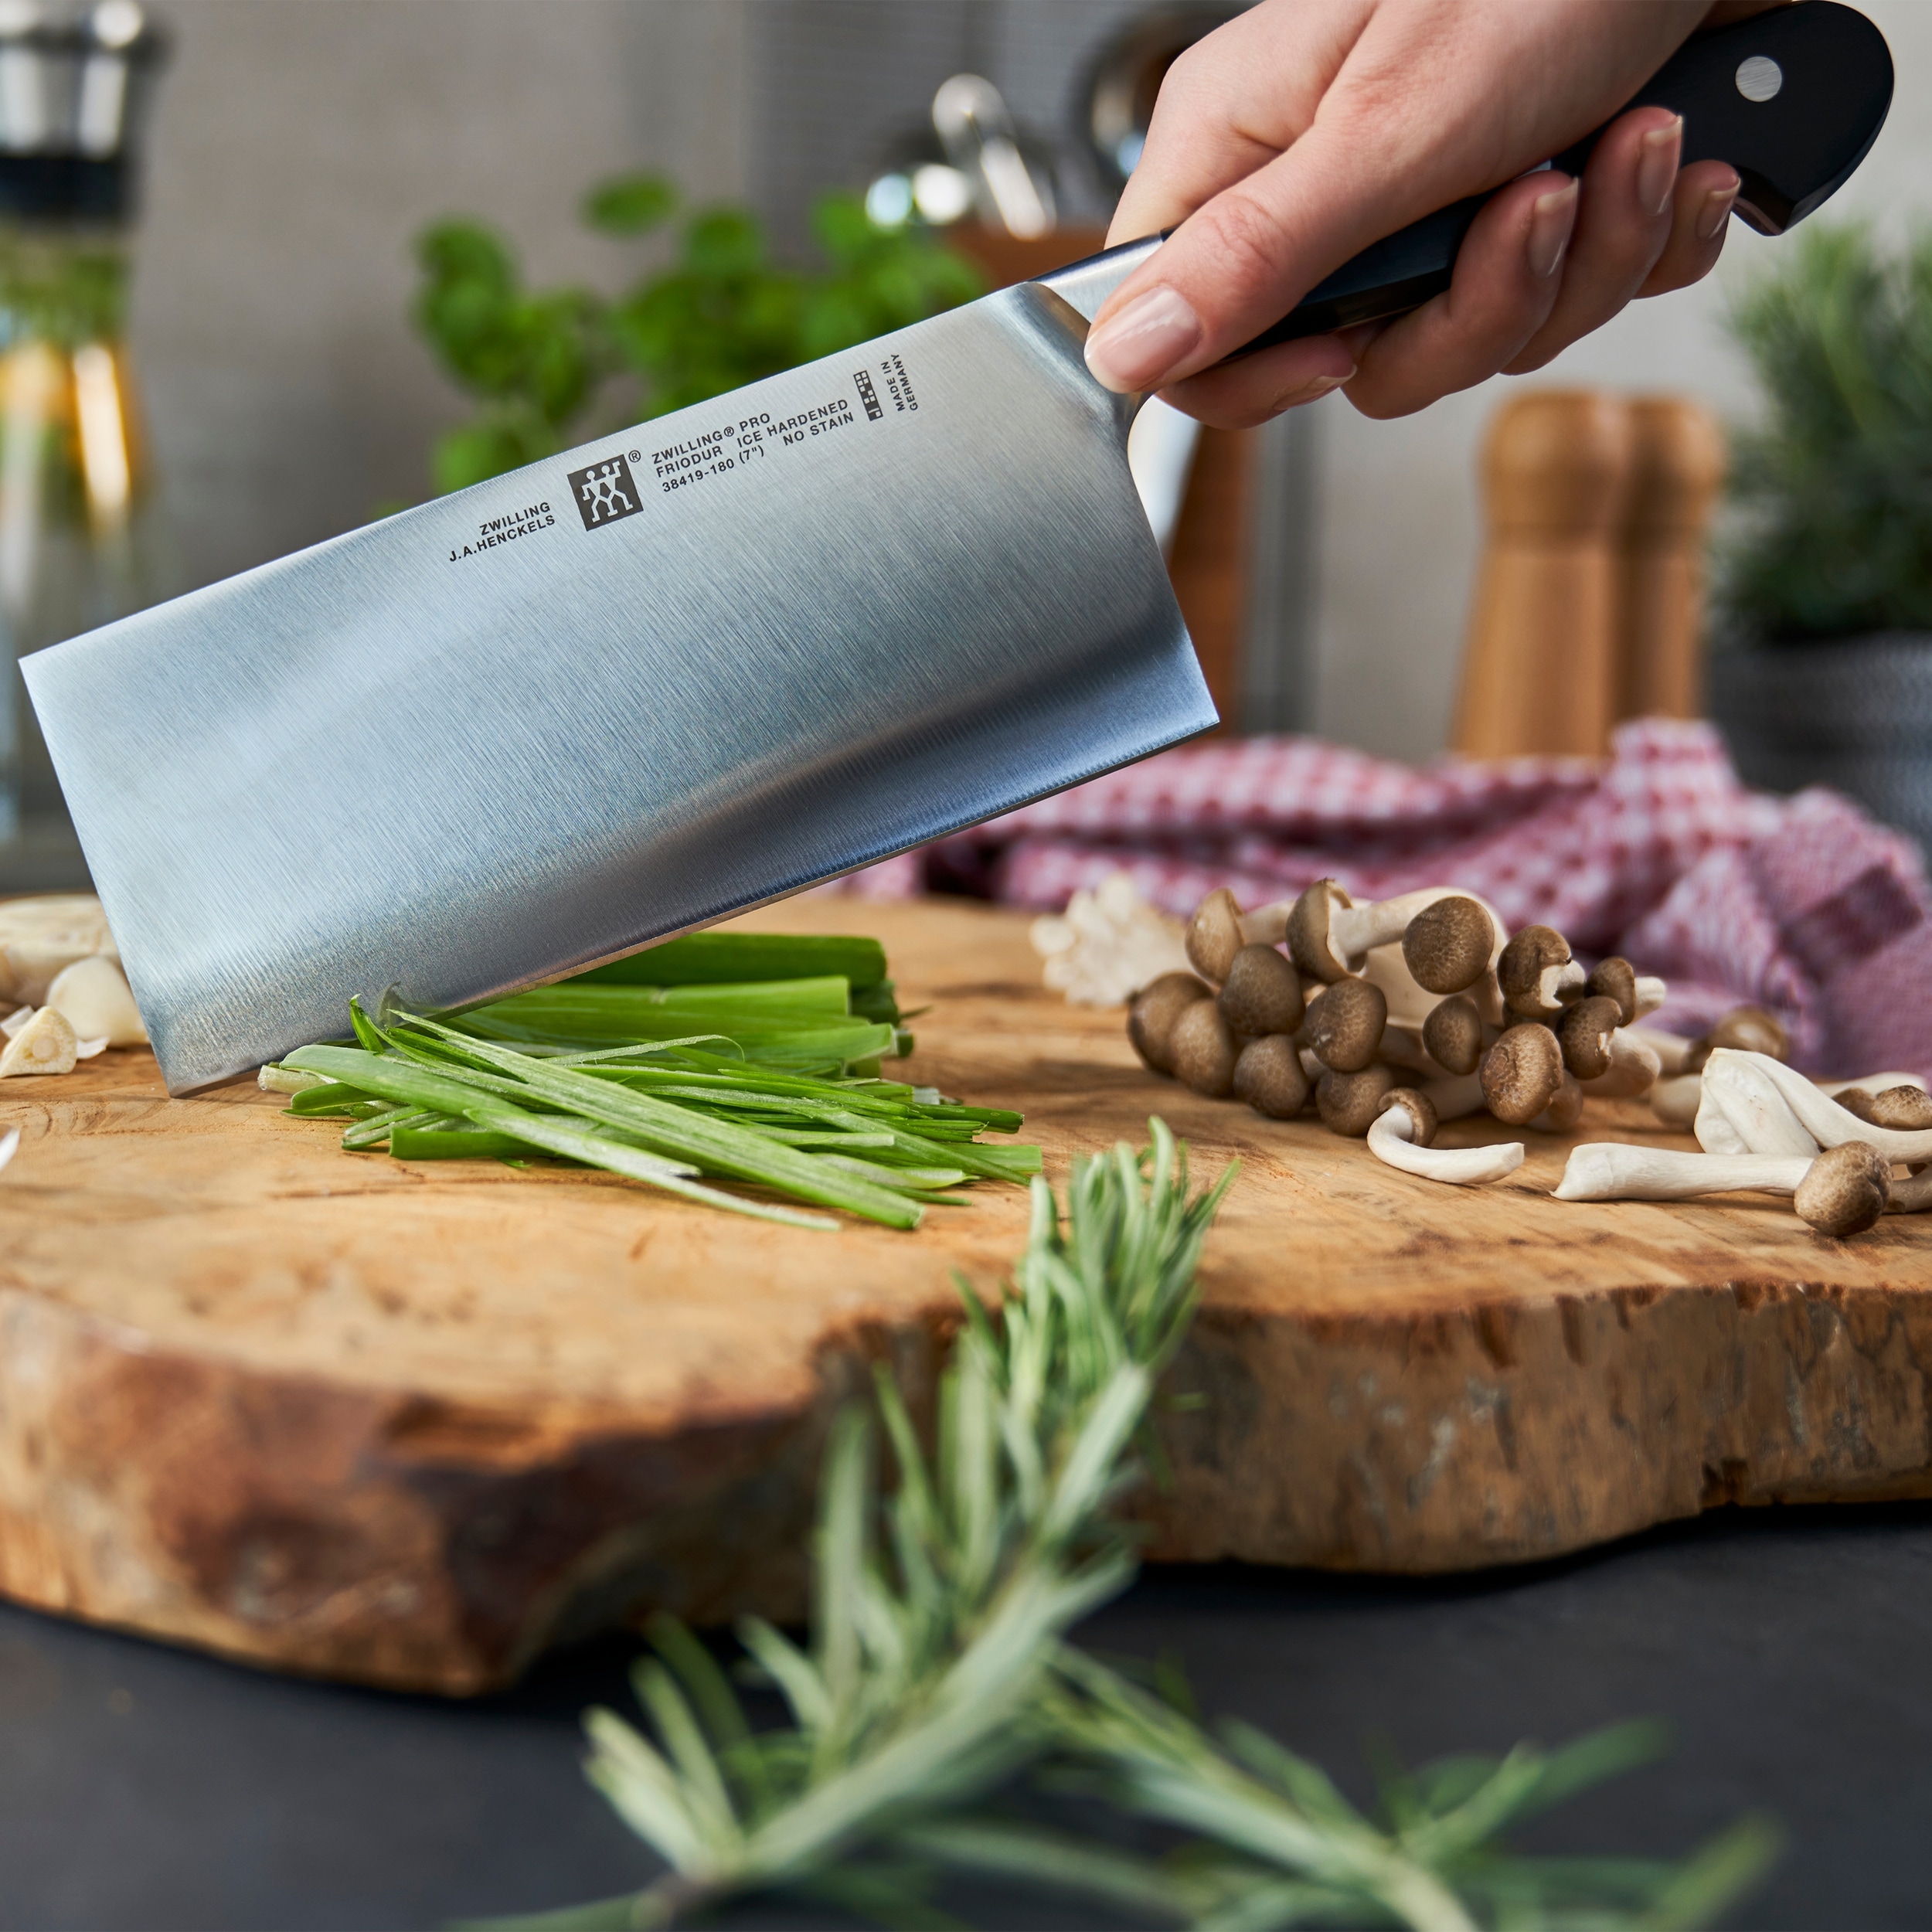 Zwilling J.A. Henckels Pro 7-Inch Chinese Chef's Knife/Vegetable Cleaver